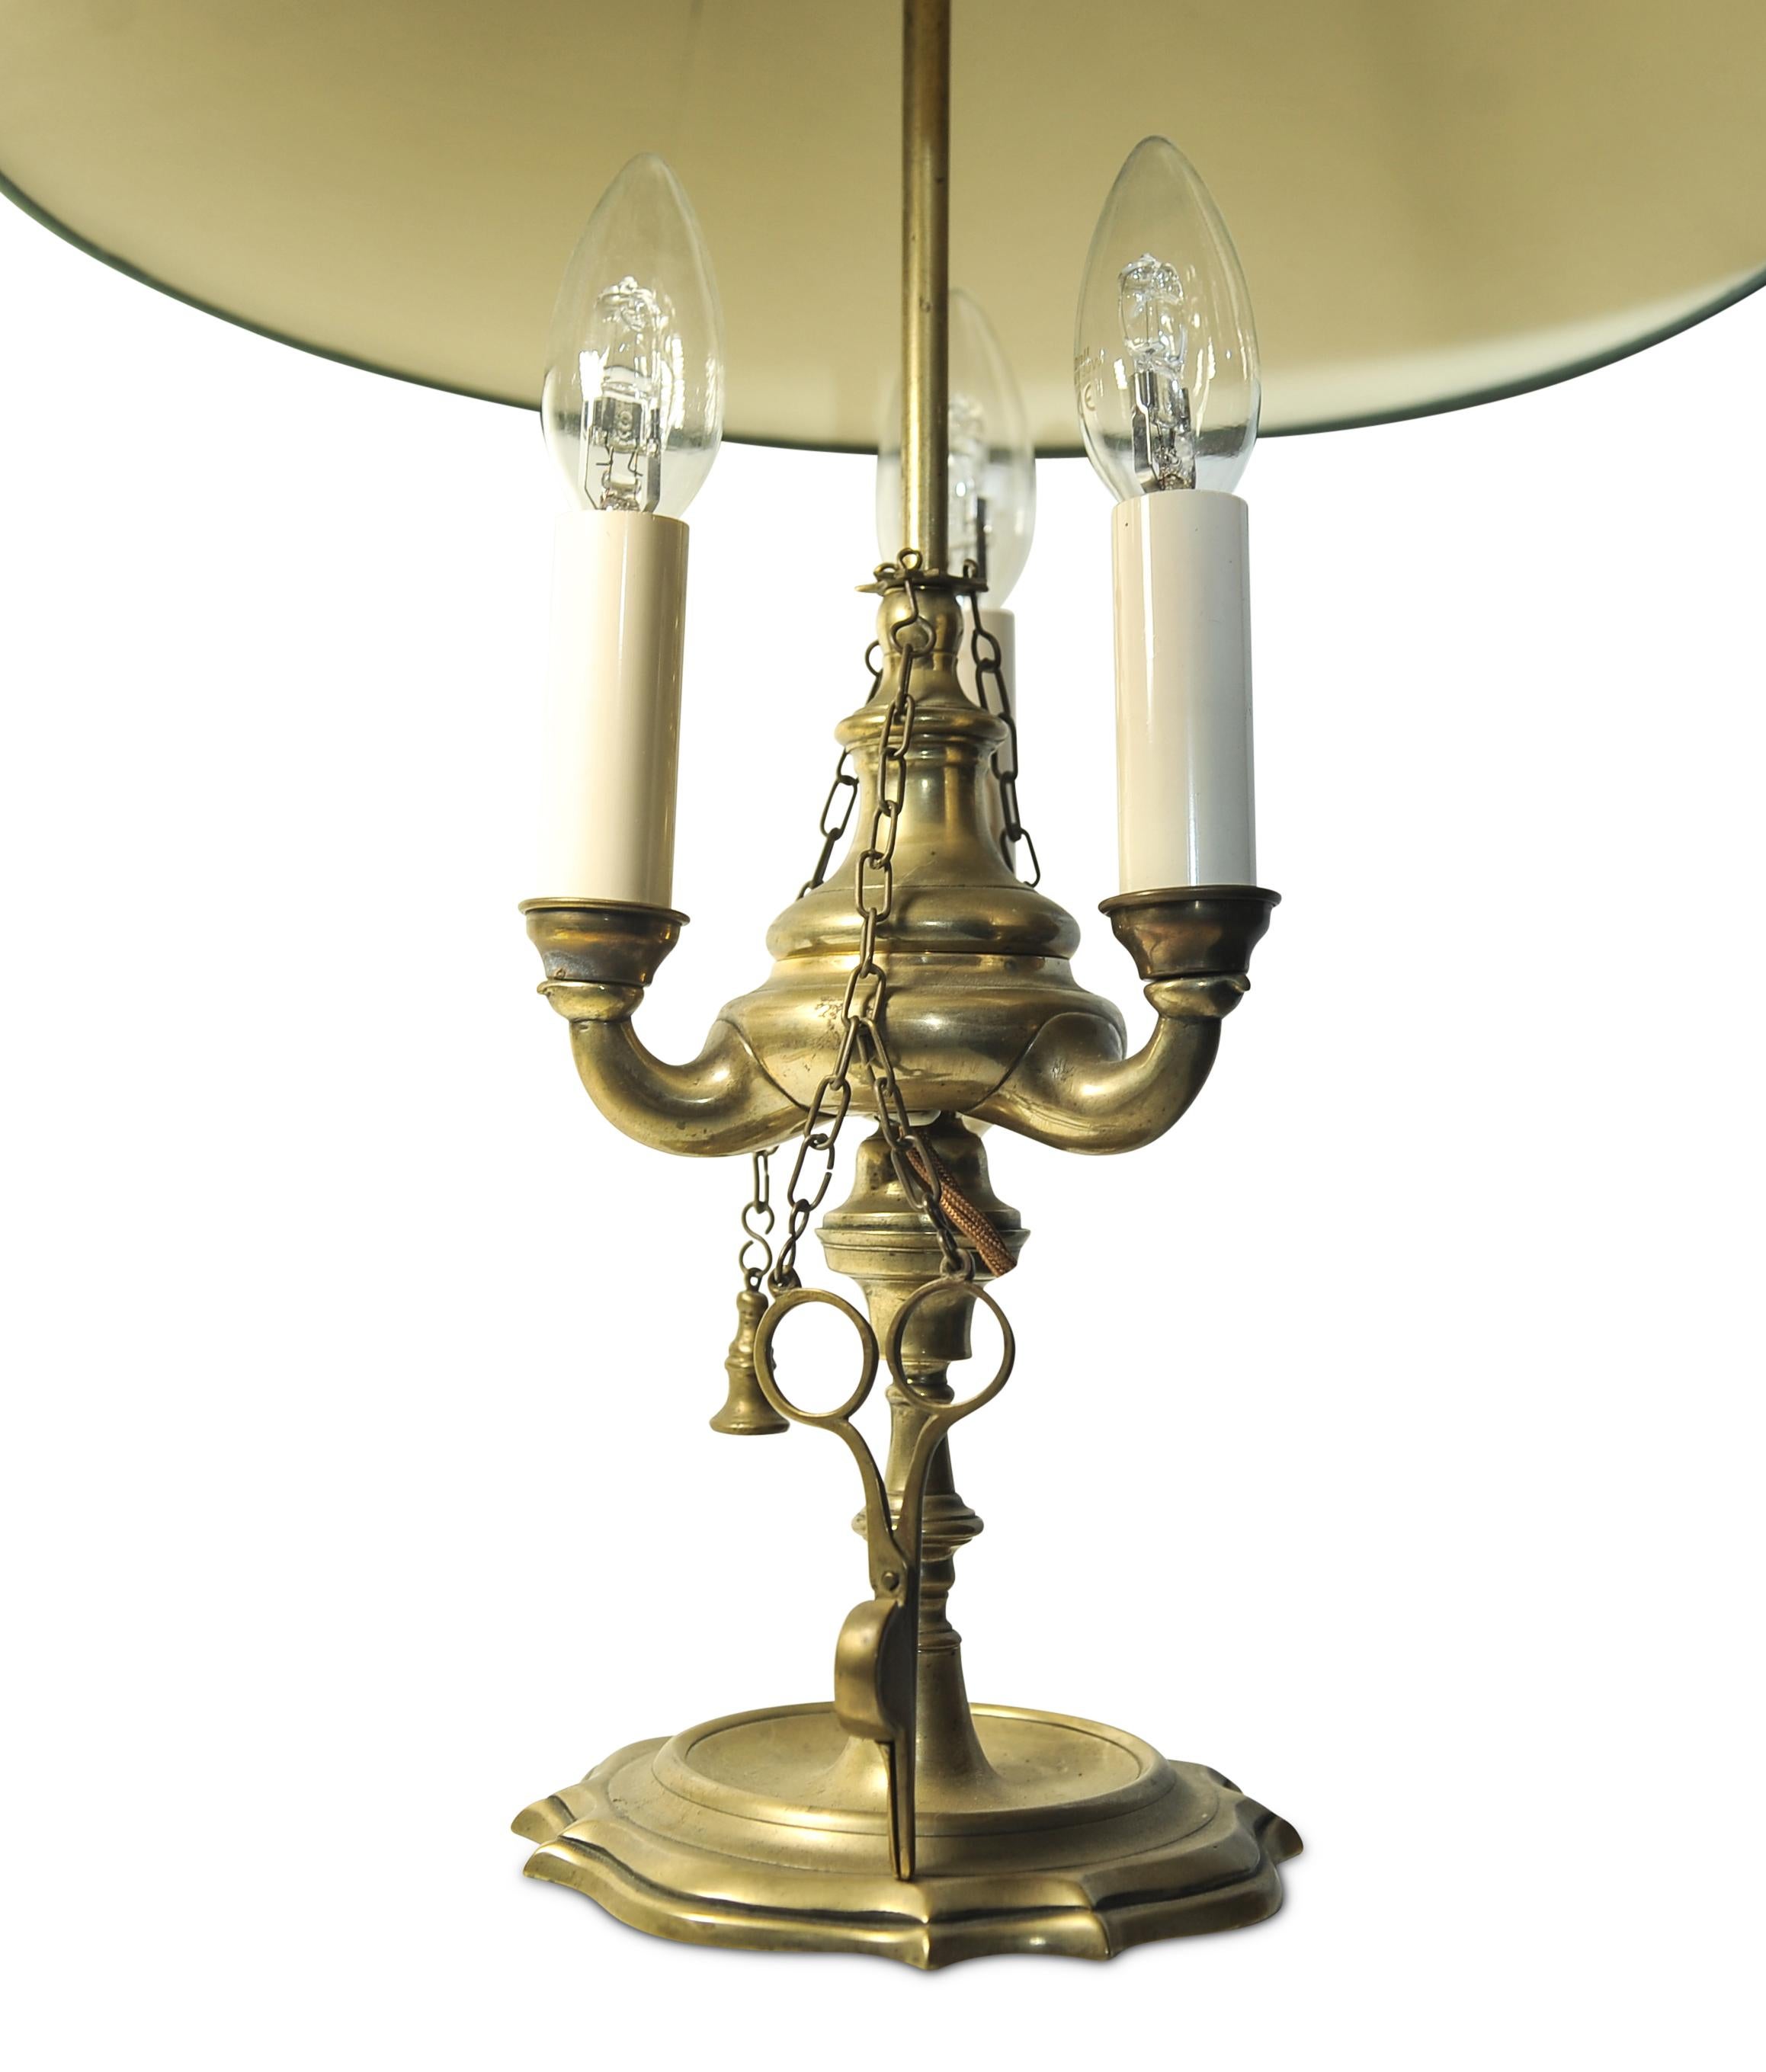 A Rare Brass Bouillotte Triple Branch Table Lamp With An Adjustable Height Shade.
Complete with rare brass accessories such as a candle snuffer and candle wick cutter. 

Item has been converted to be a modern lamp, from an original candle lamp.
